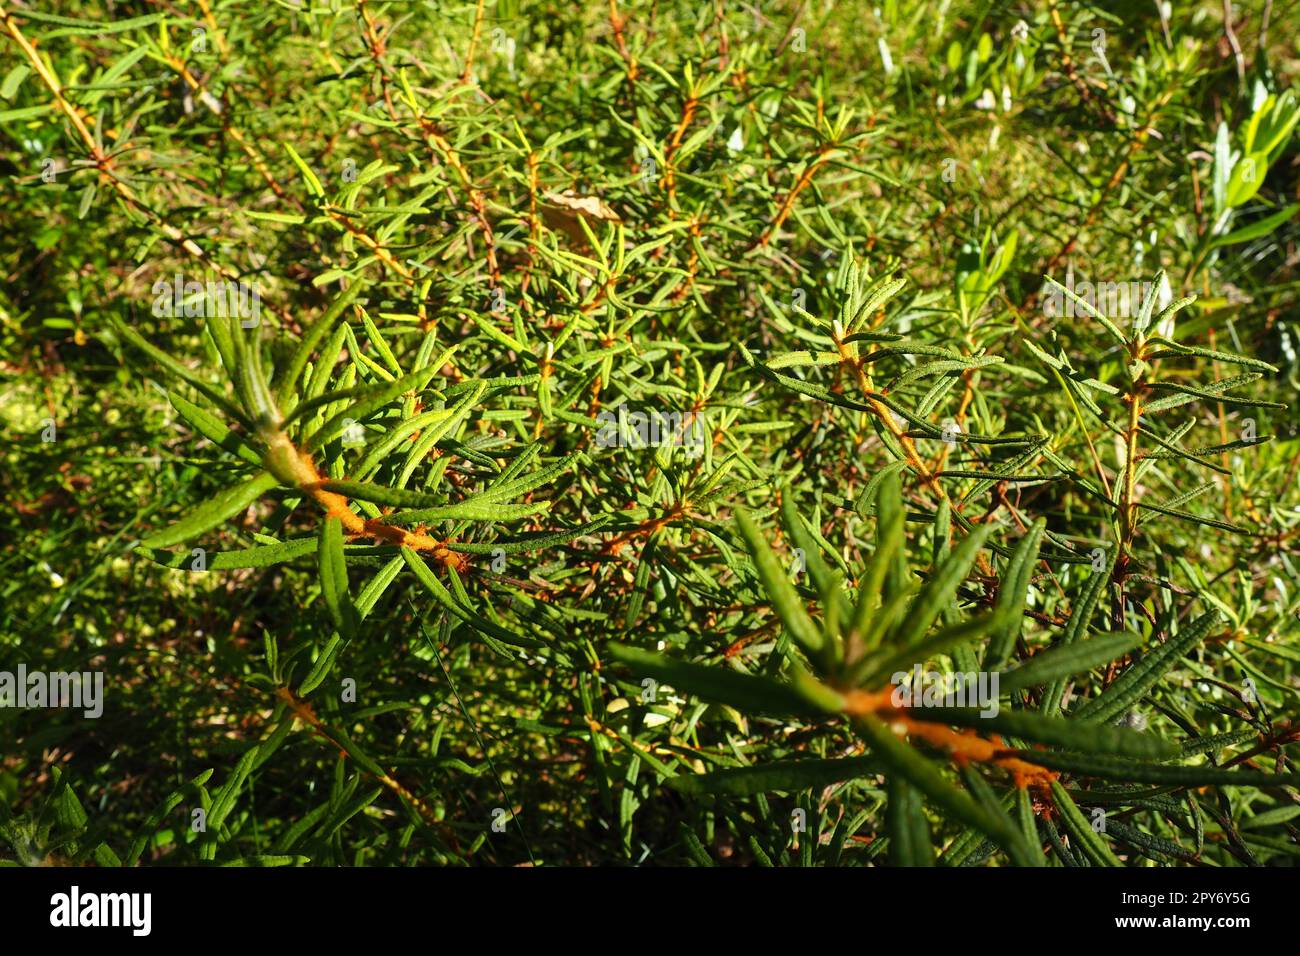 Marsh rosemary Ledum palustre is a plant species from the Ledum genus of the Heather family Ericaceae. Rhododendron tomentosum. Popular names: bagno, fragrant bagun, marsh madness, swamp Stock Photo